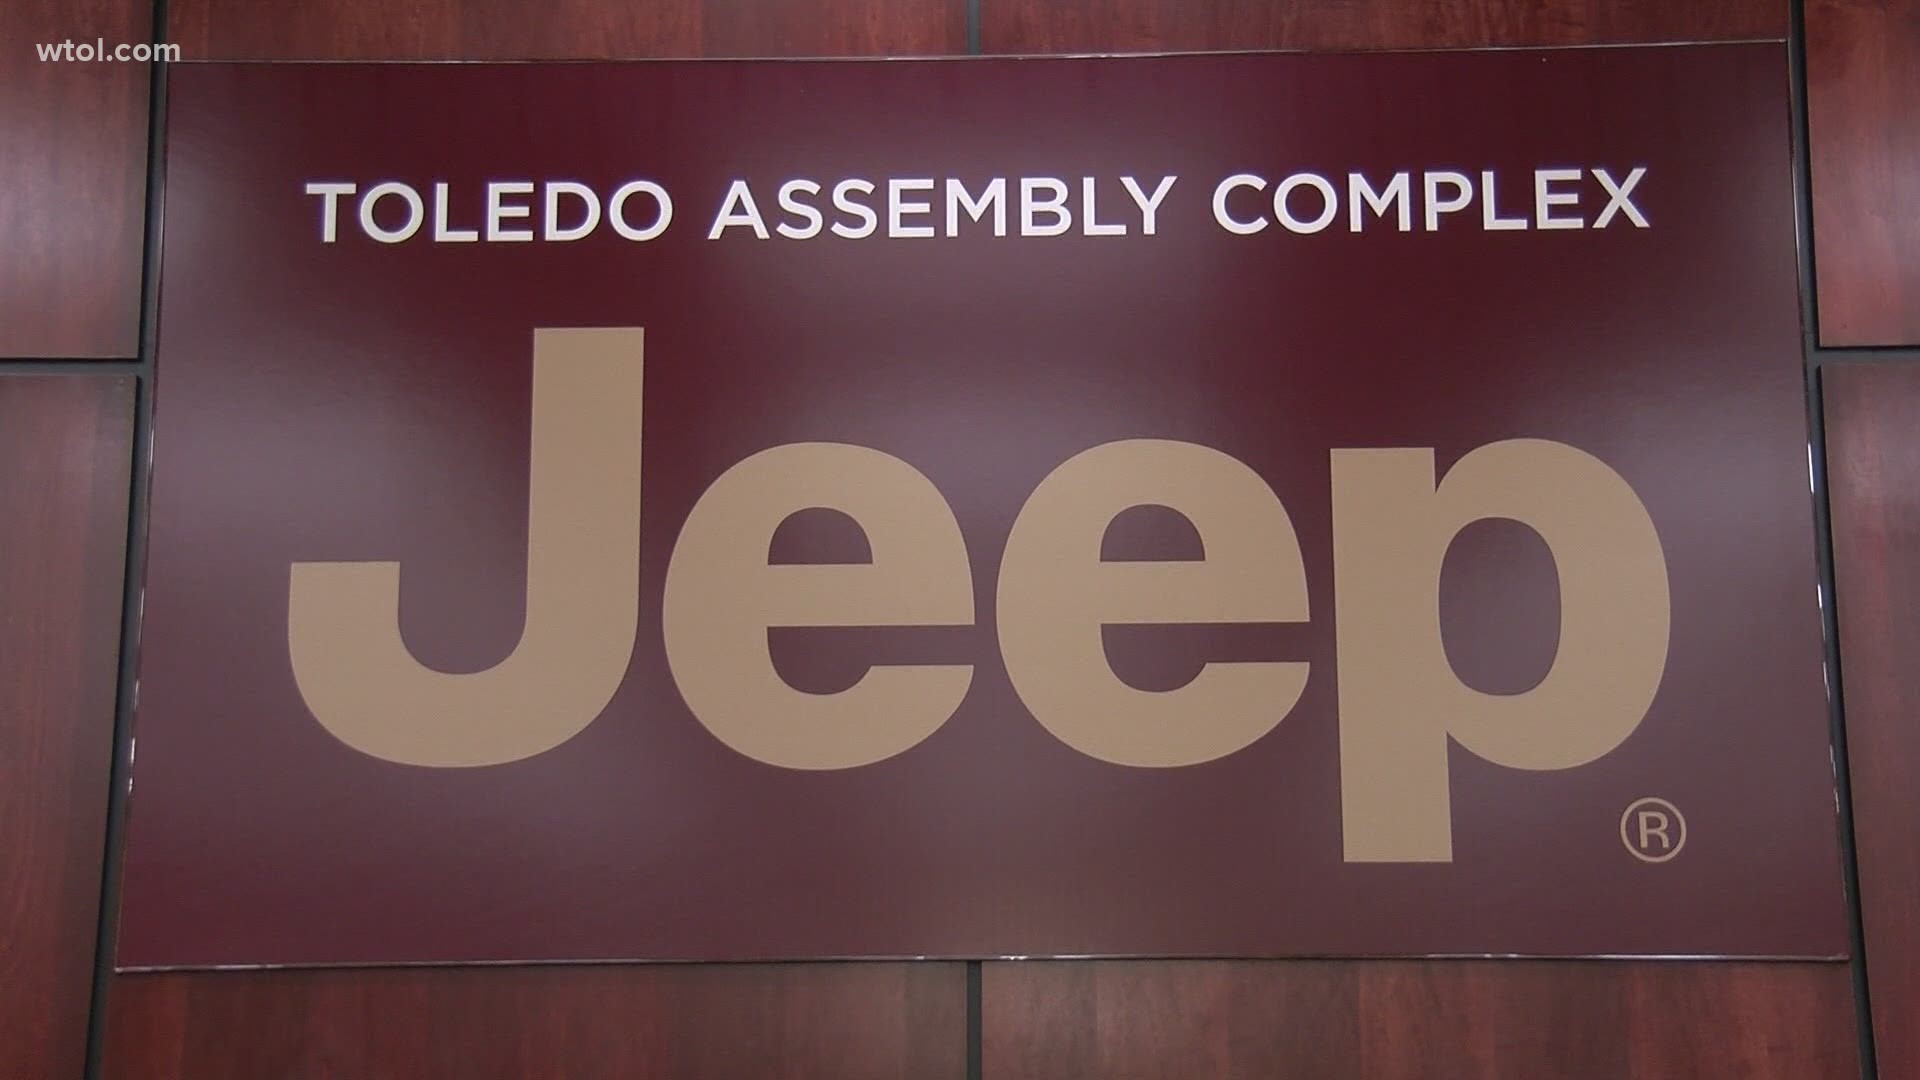 With thousands of people in and out of the Toledo Jeep plant every day, some employees are concerned that not enough is being done to prevent possible exposure.